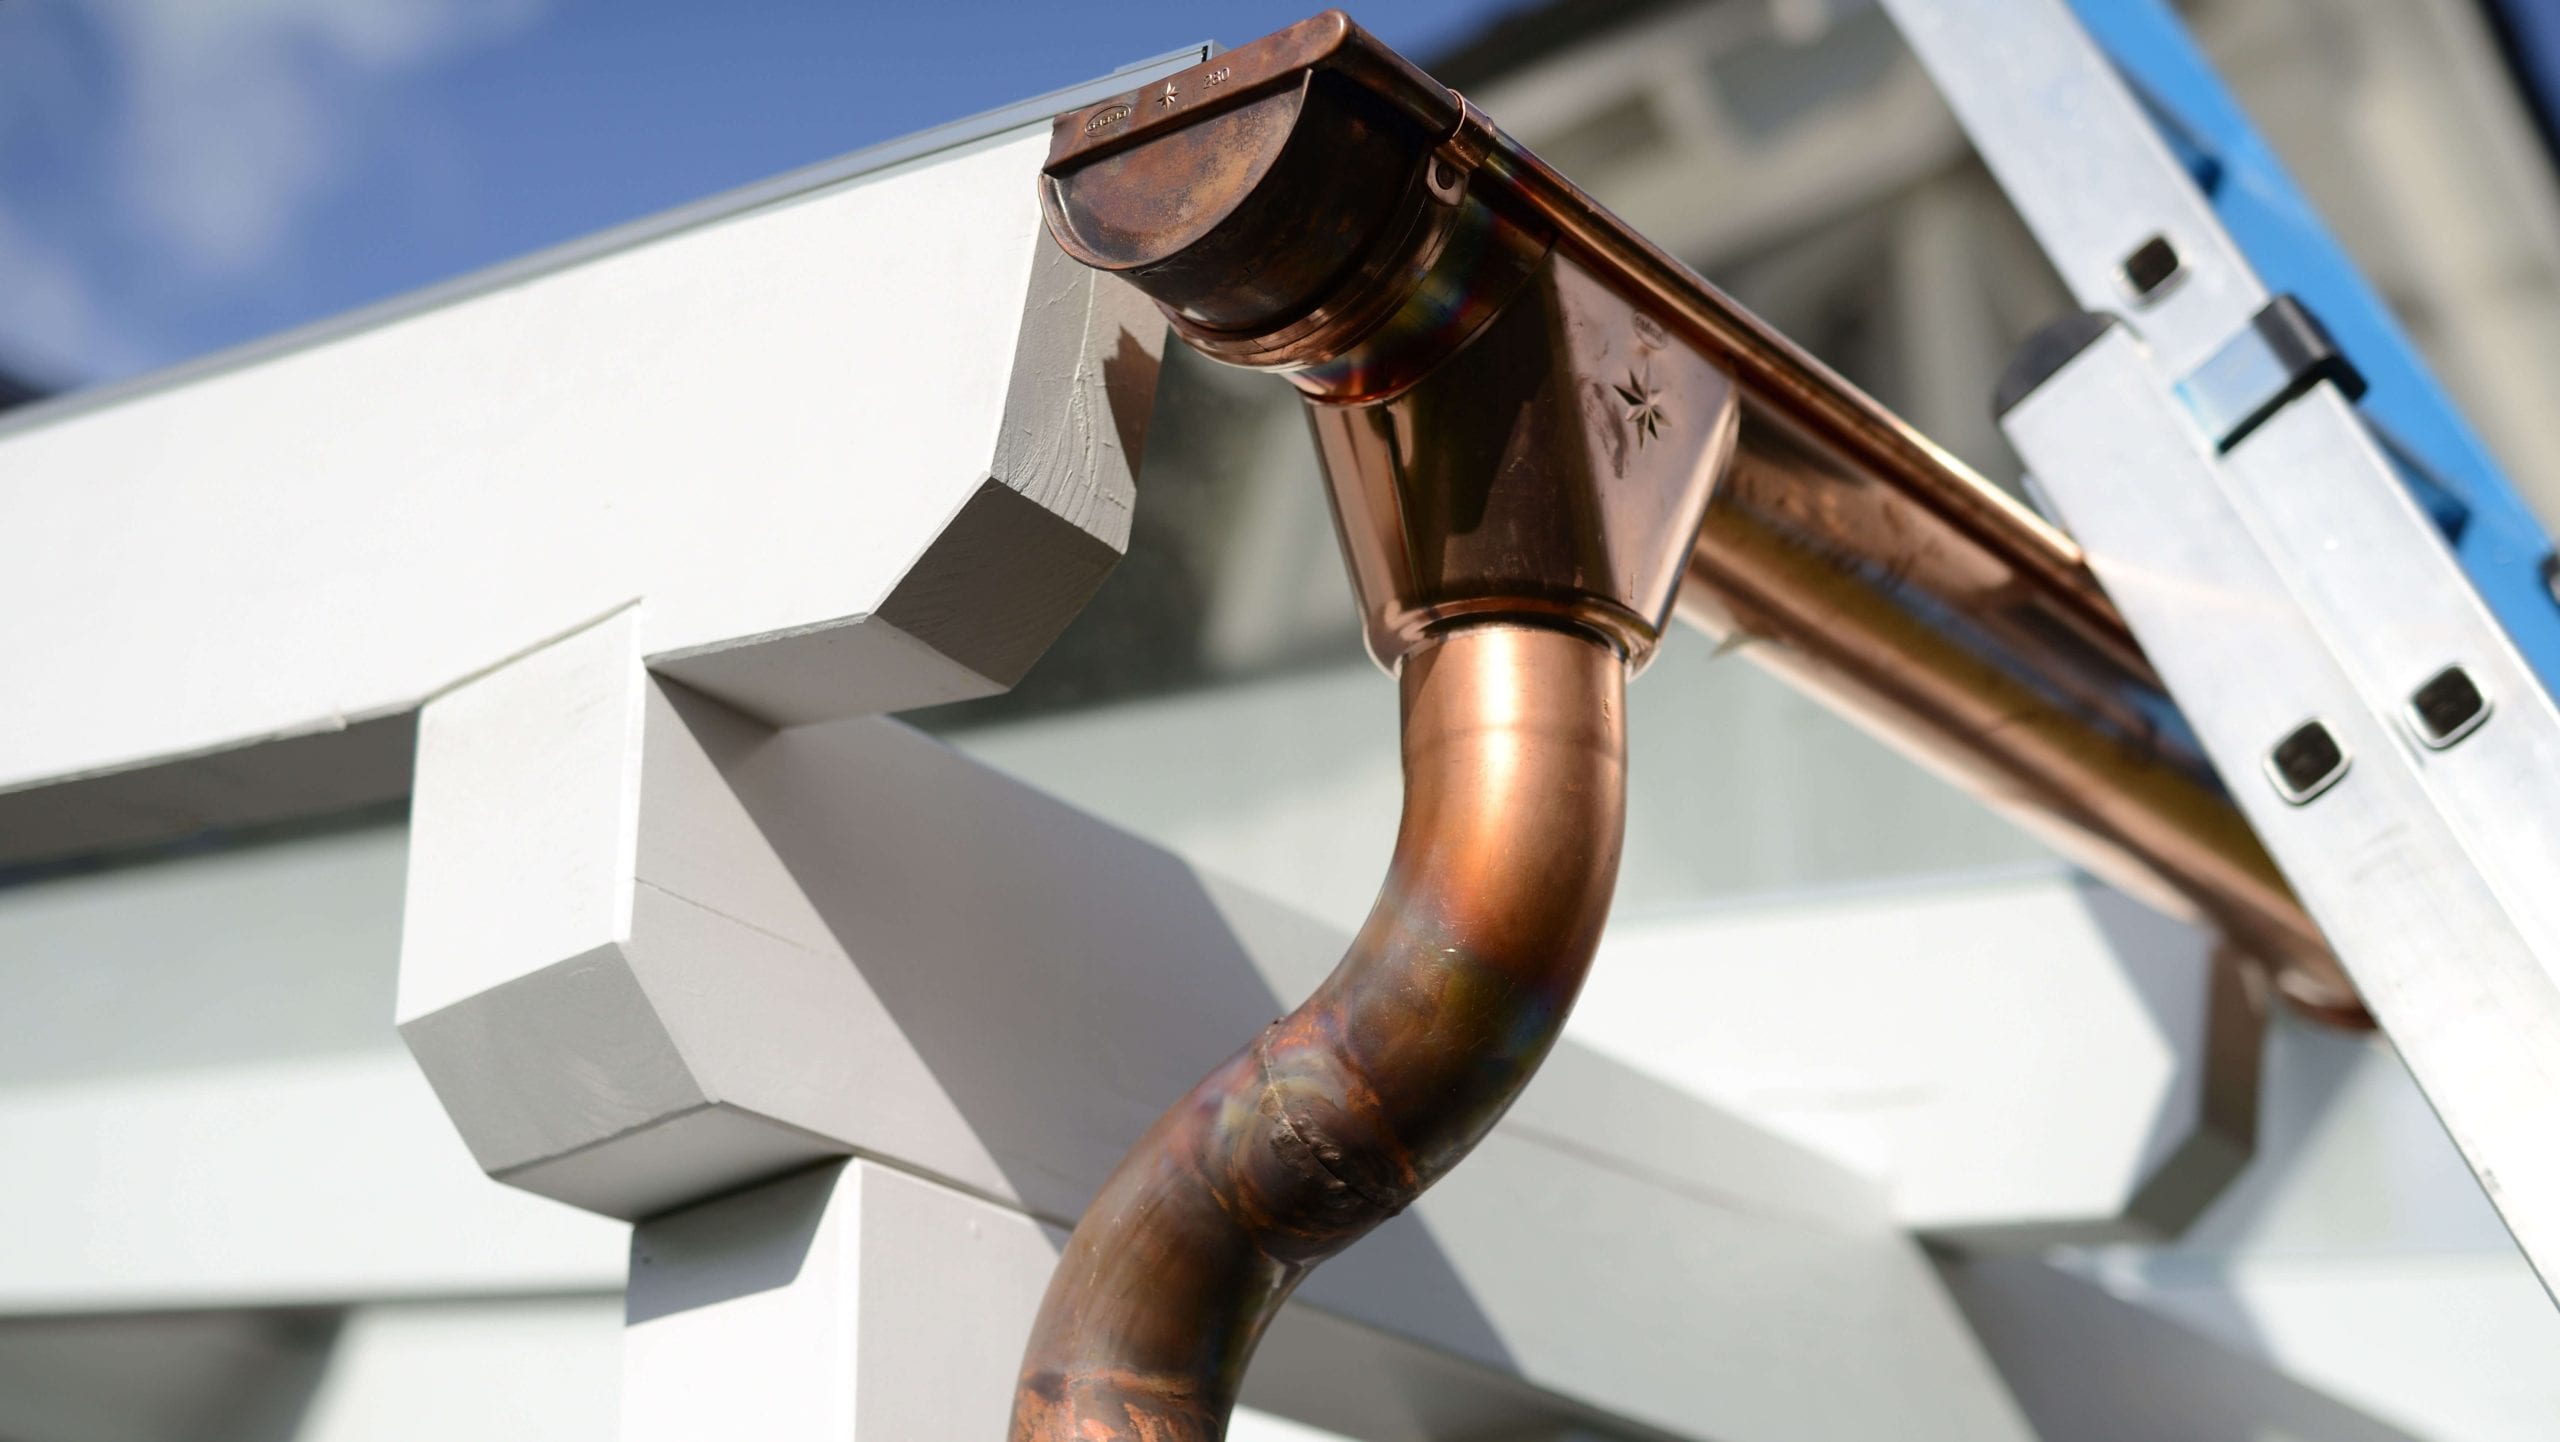 Make your property stand out with copper gutters. Contact for gutter installation in Richmond